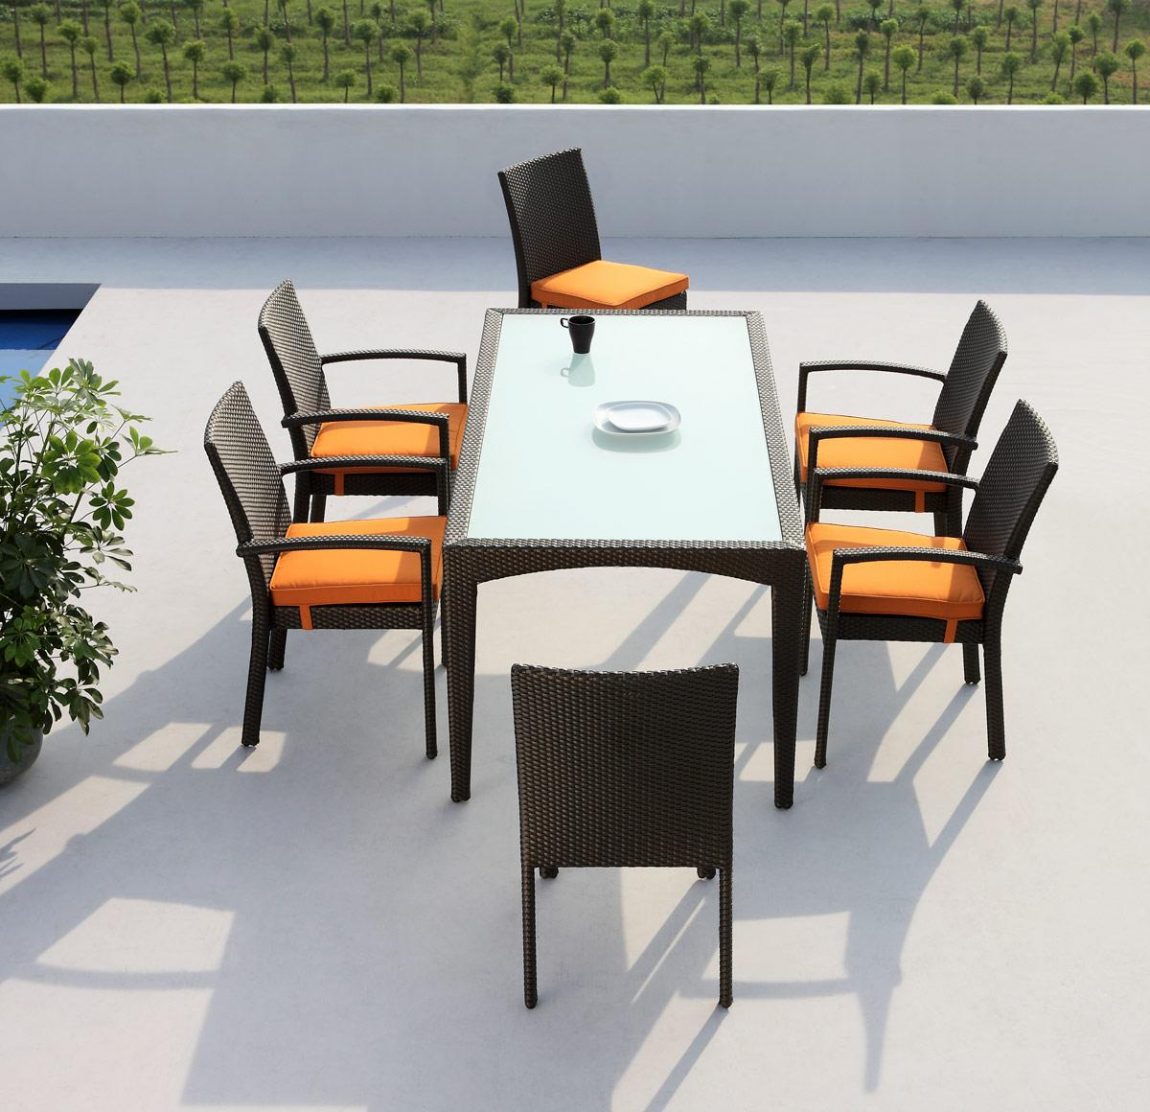 Furniture + Accessories Large-size Awesome Terrace Dining Chairs With Rattan And Orange Sofa Best Rattan Table Glass Plate Amazing Outdoor Place With White Paint Ideas Green Plant For Best Natural View Furniture + Accessories